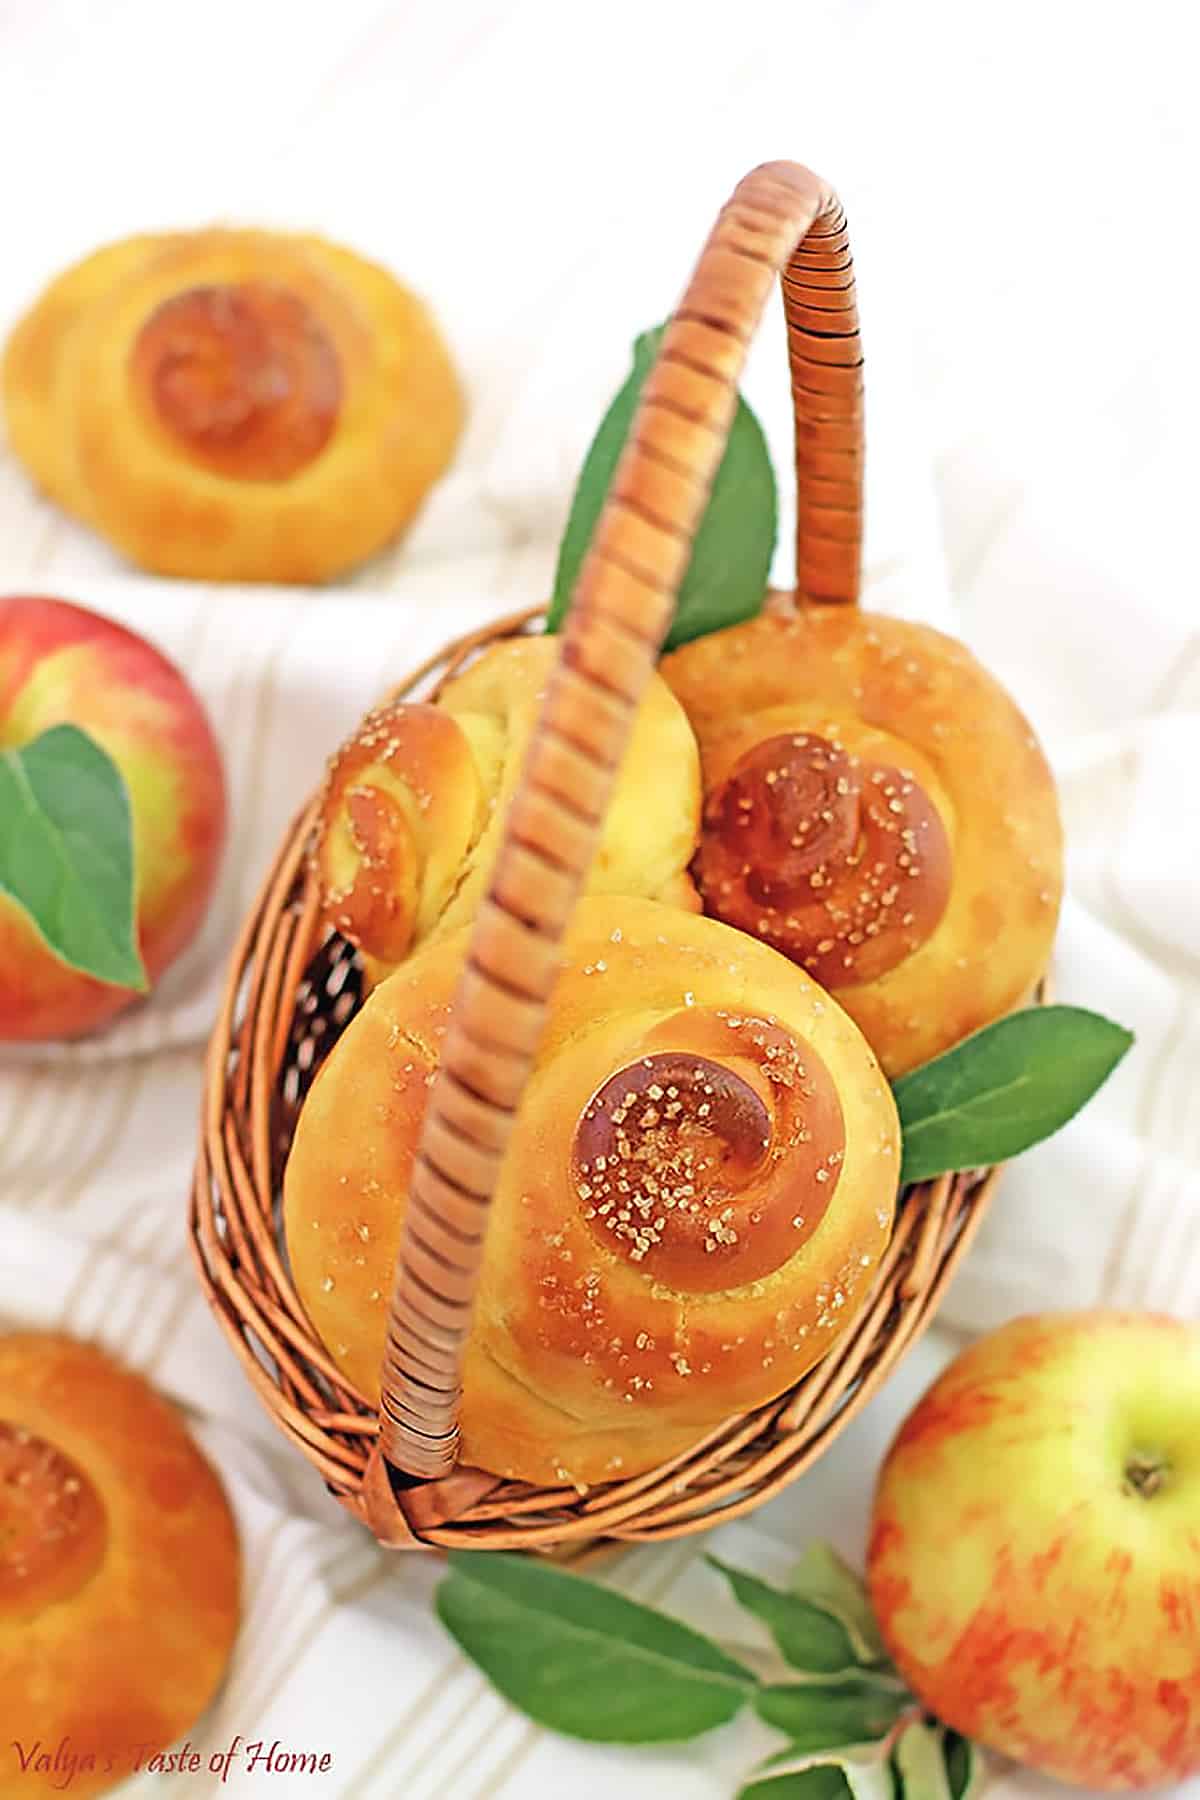 Ah, the sweet flavors of fall! These super-soft, Sweet Swirl Apple Buns are a wonderful comfort fall treat. The juicy grated apples make them incredibly moist, delicious, and irresistible! They look so beautiful and glossy after being brushed with the egg glaze and sprinkled with organic raw sugar. You just wanna eat them raw, like cookie dough! ;)